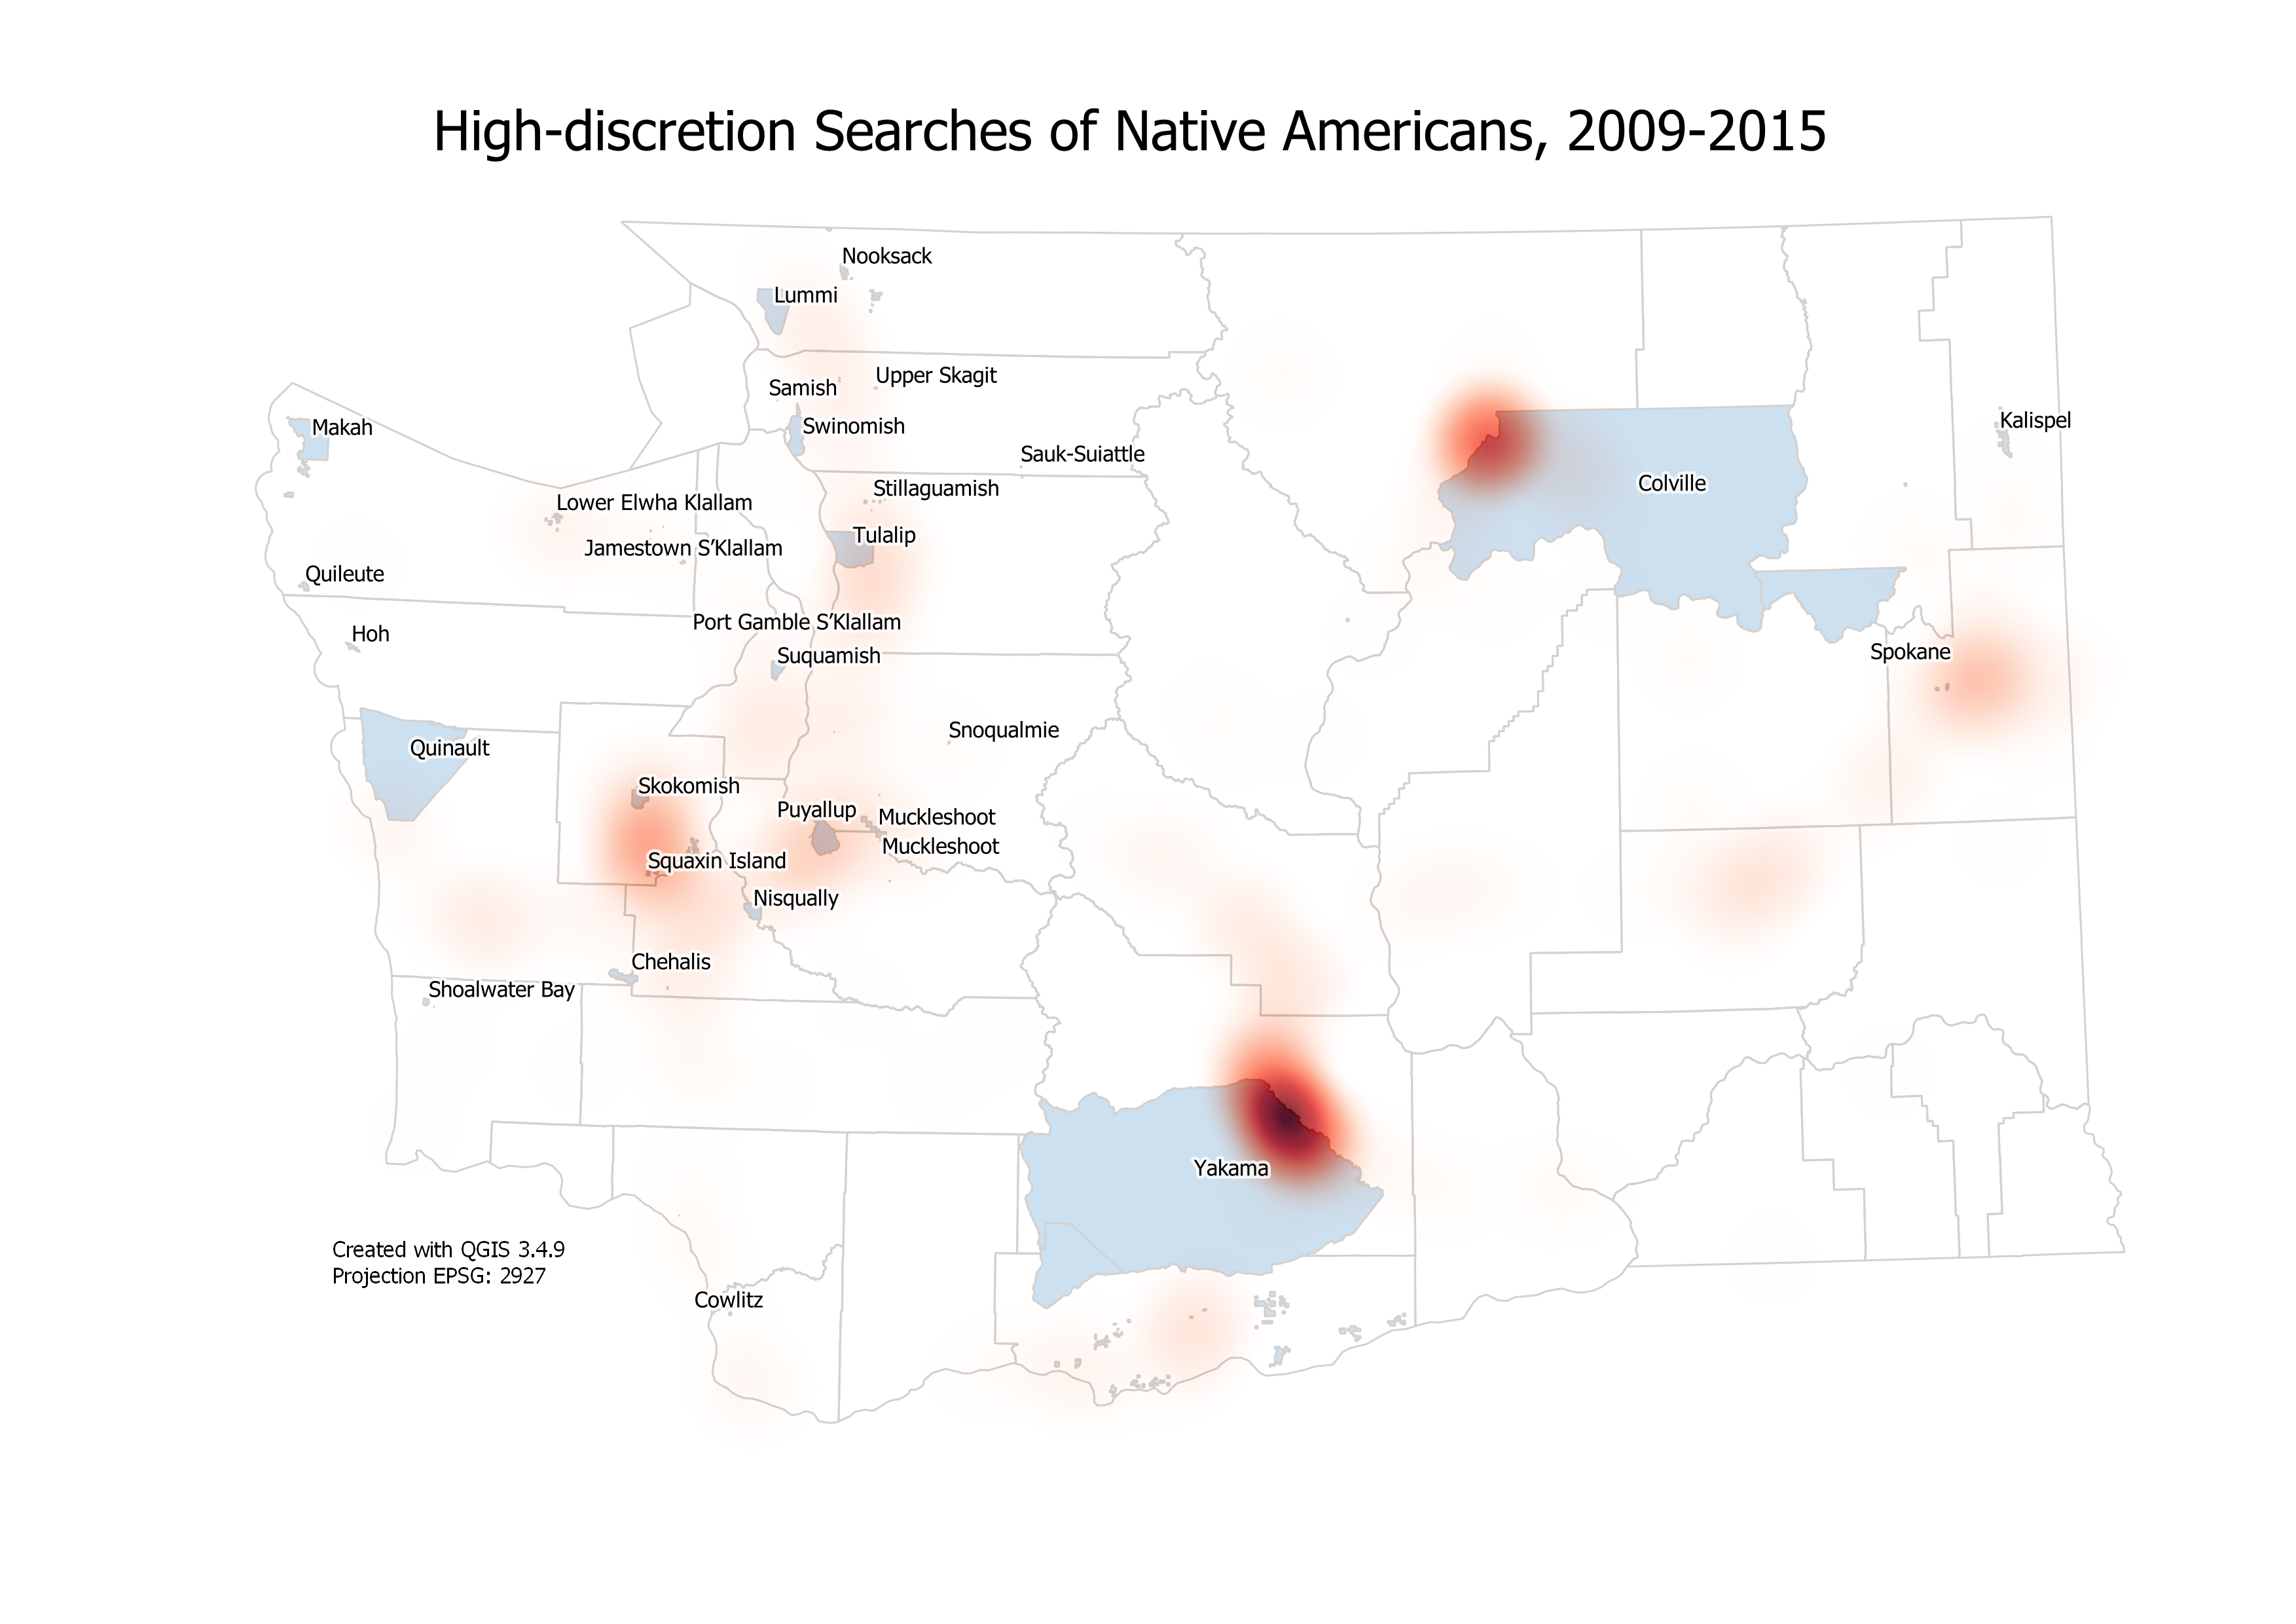 A heat map showing the frequency of police interactions across tribal lands